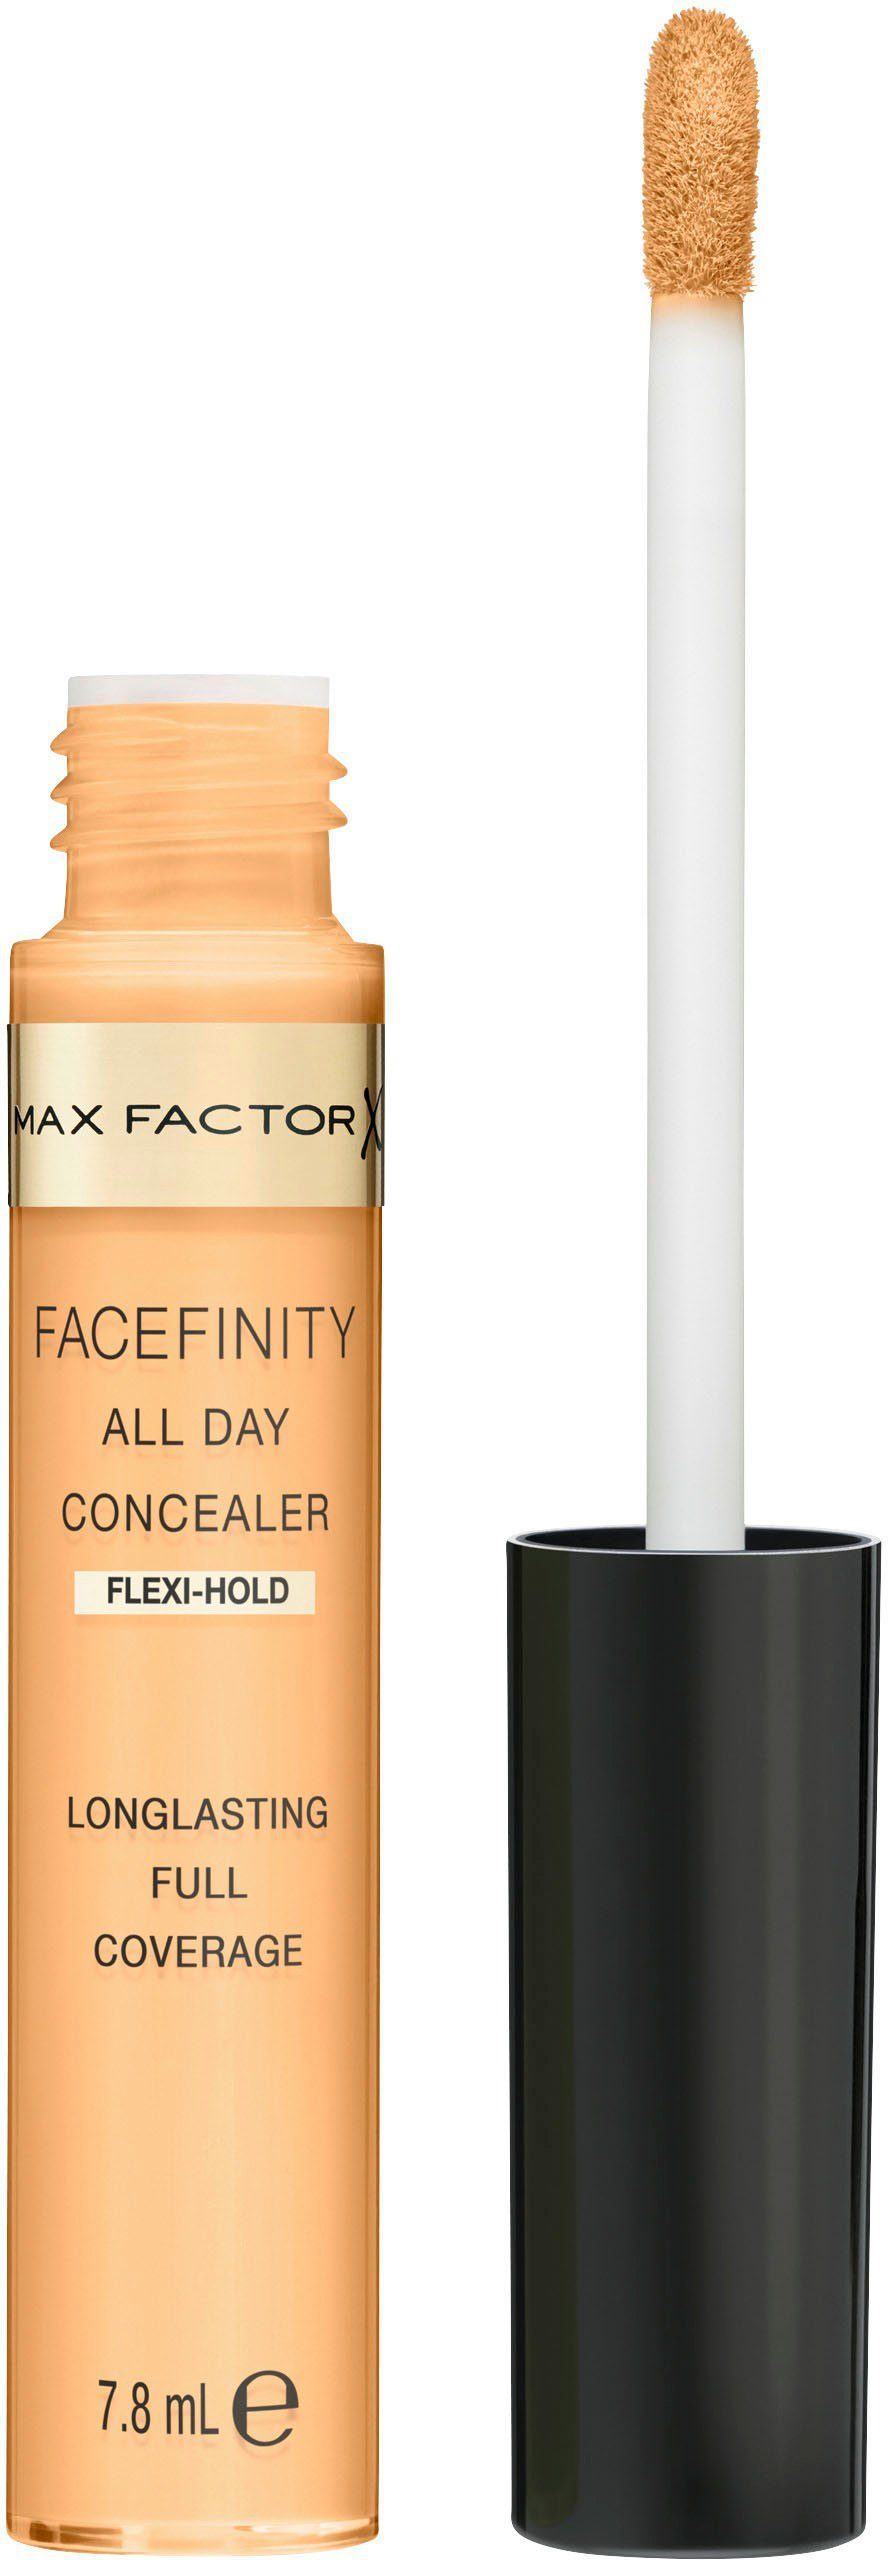 Day 40 Concealer MAX Flawless All FACTOR FACEFINITY